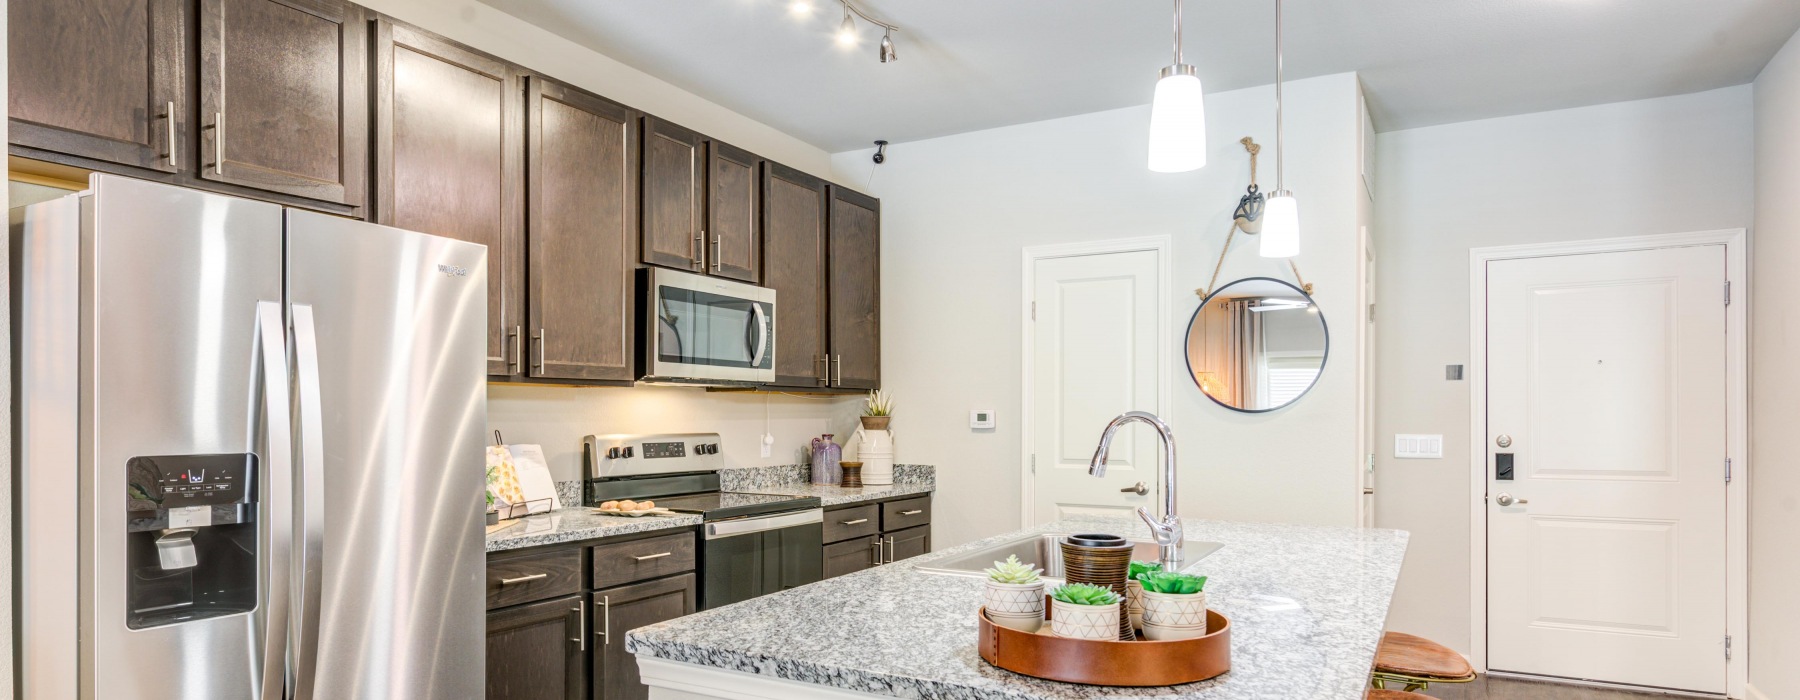 Model kitchen at our apartments in Midland, TX, featuring wood grain floor paneling and a kitchen island.